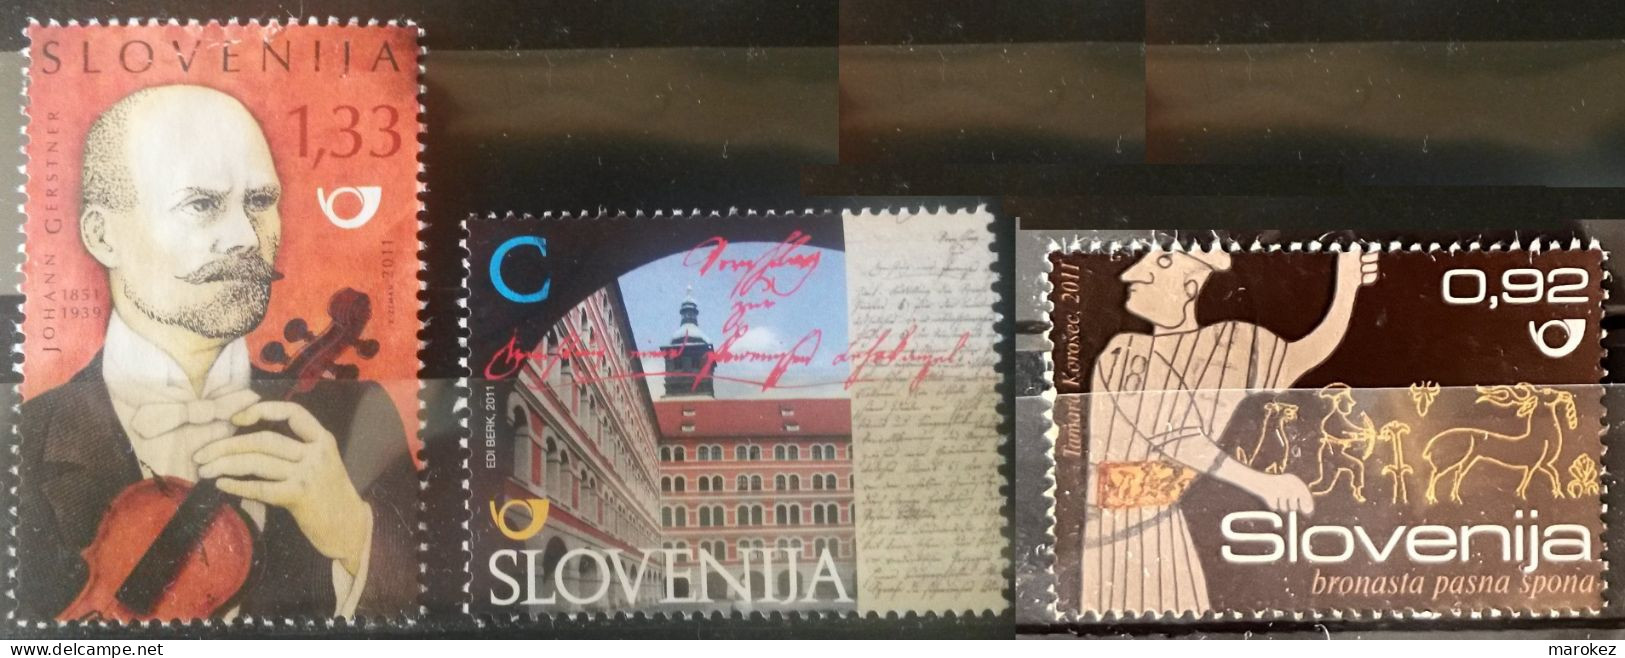 SLOVENIA 2011 Music, History & Archaeology 3 Postally Used Stamps MICHEL # 902,912,925 - Slowenien